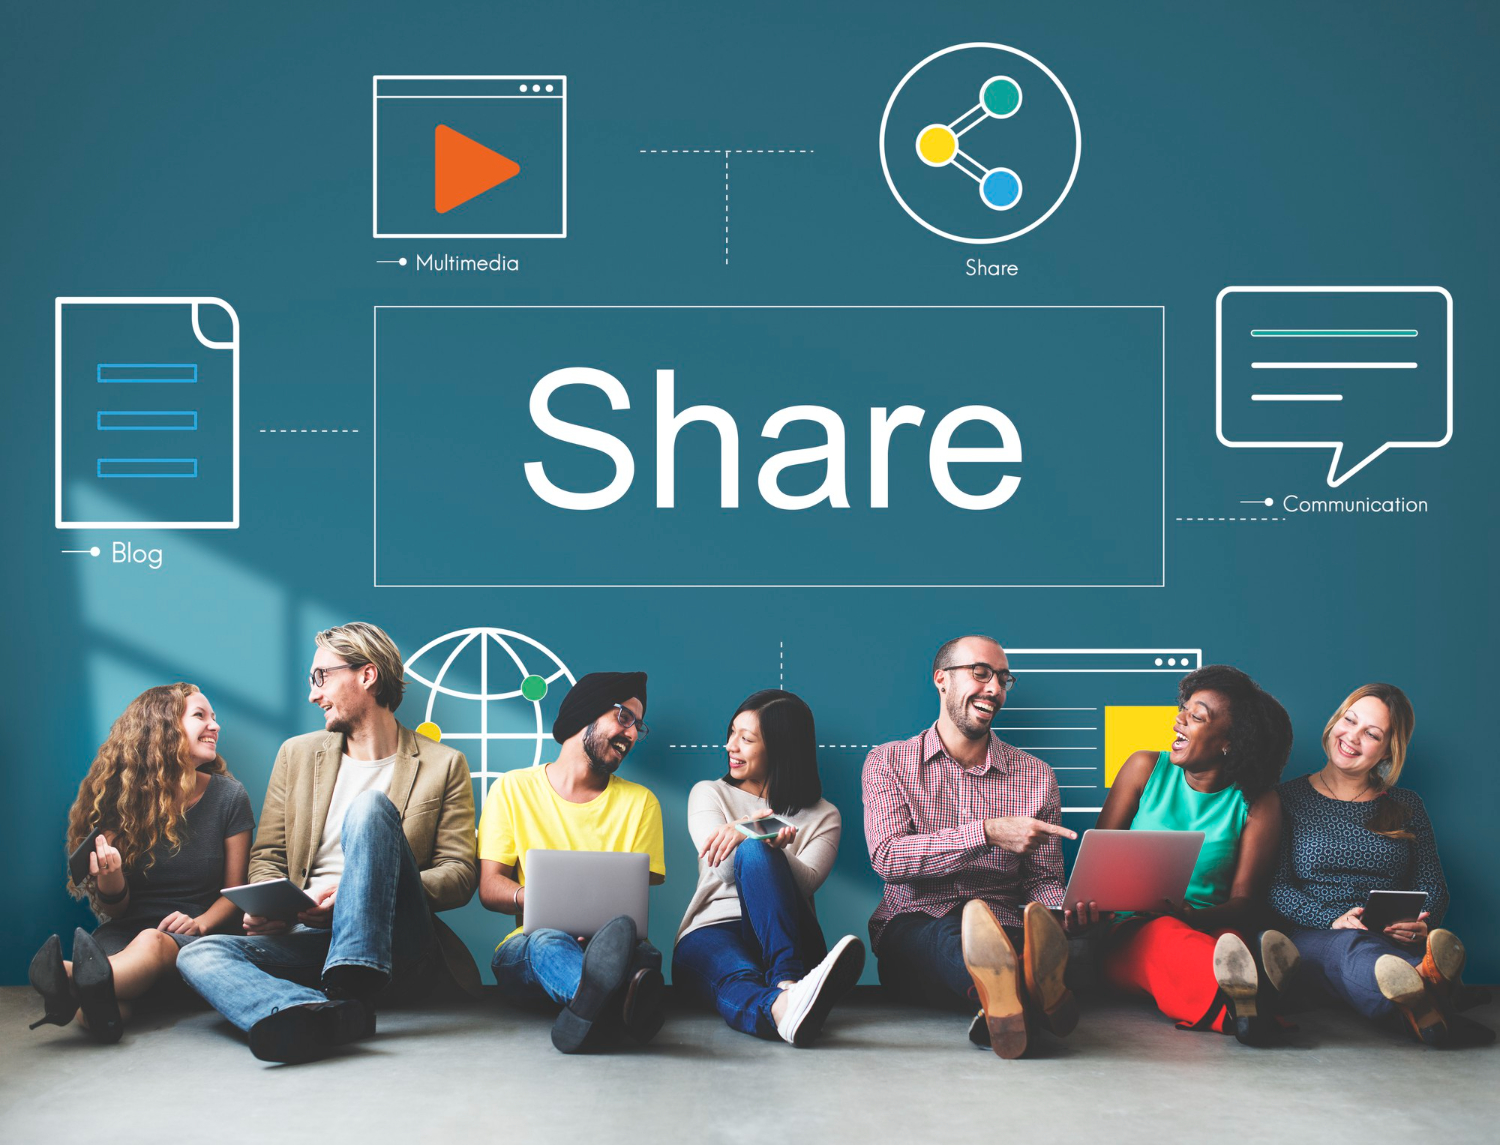 Brands use UGC to connect better with audience